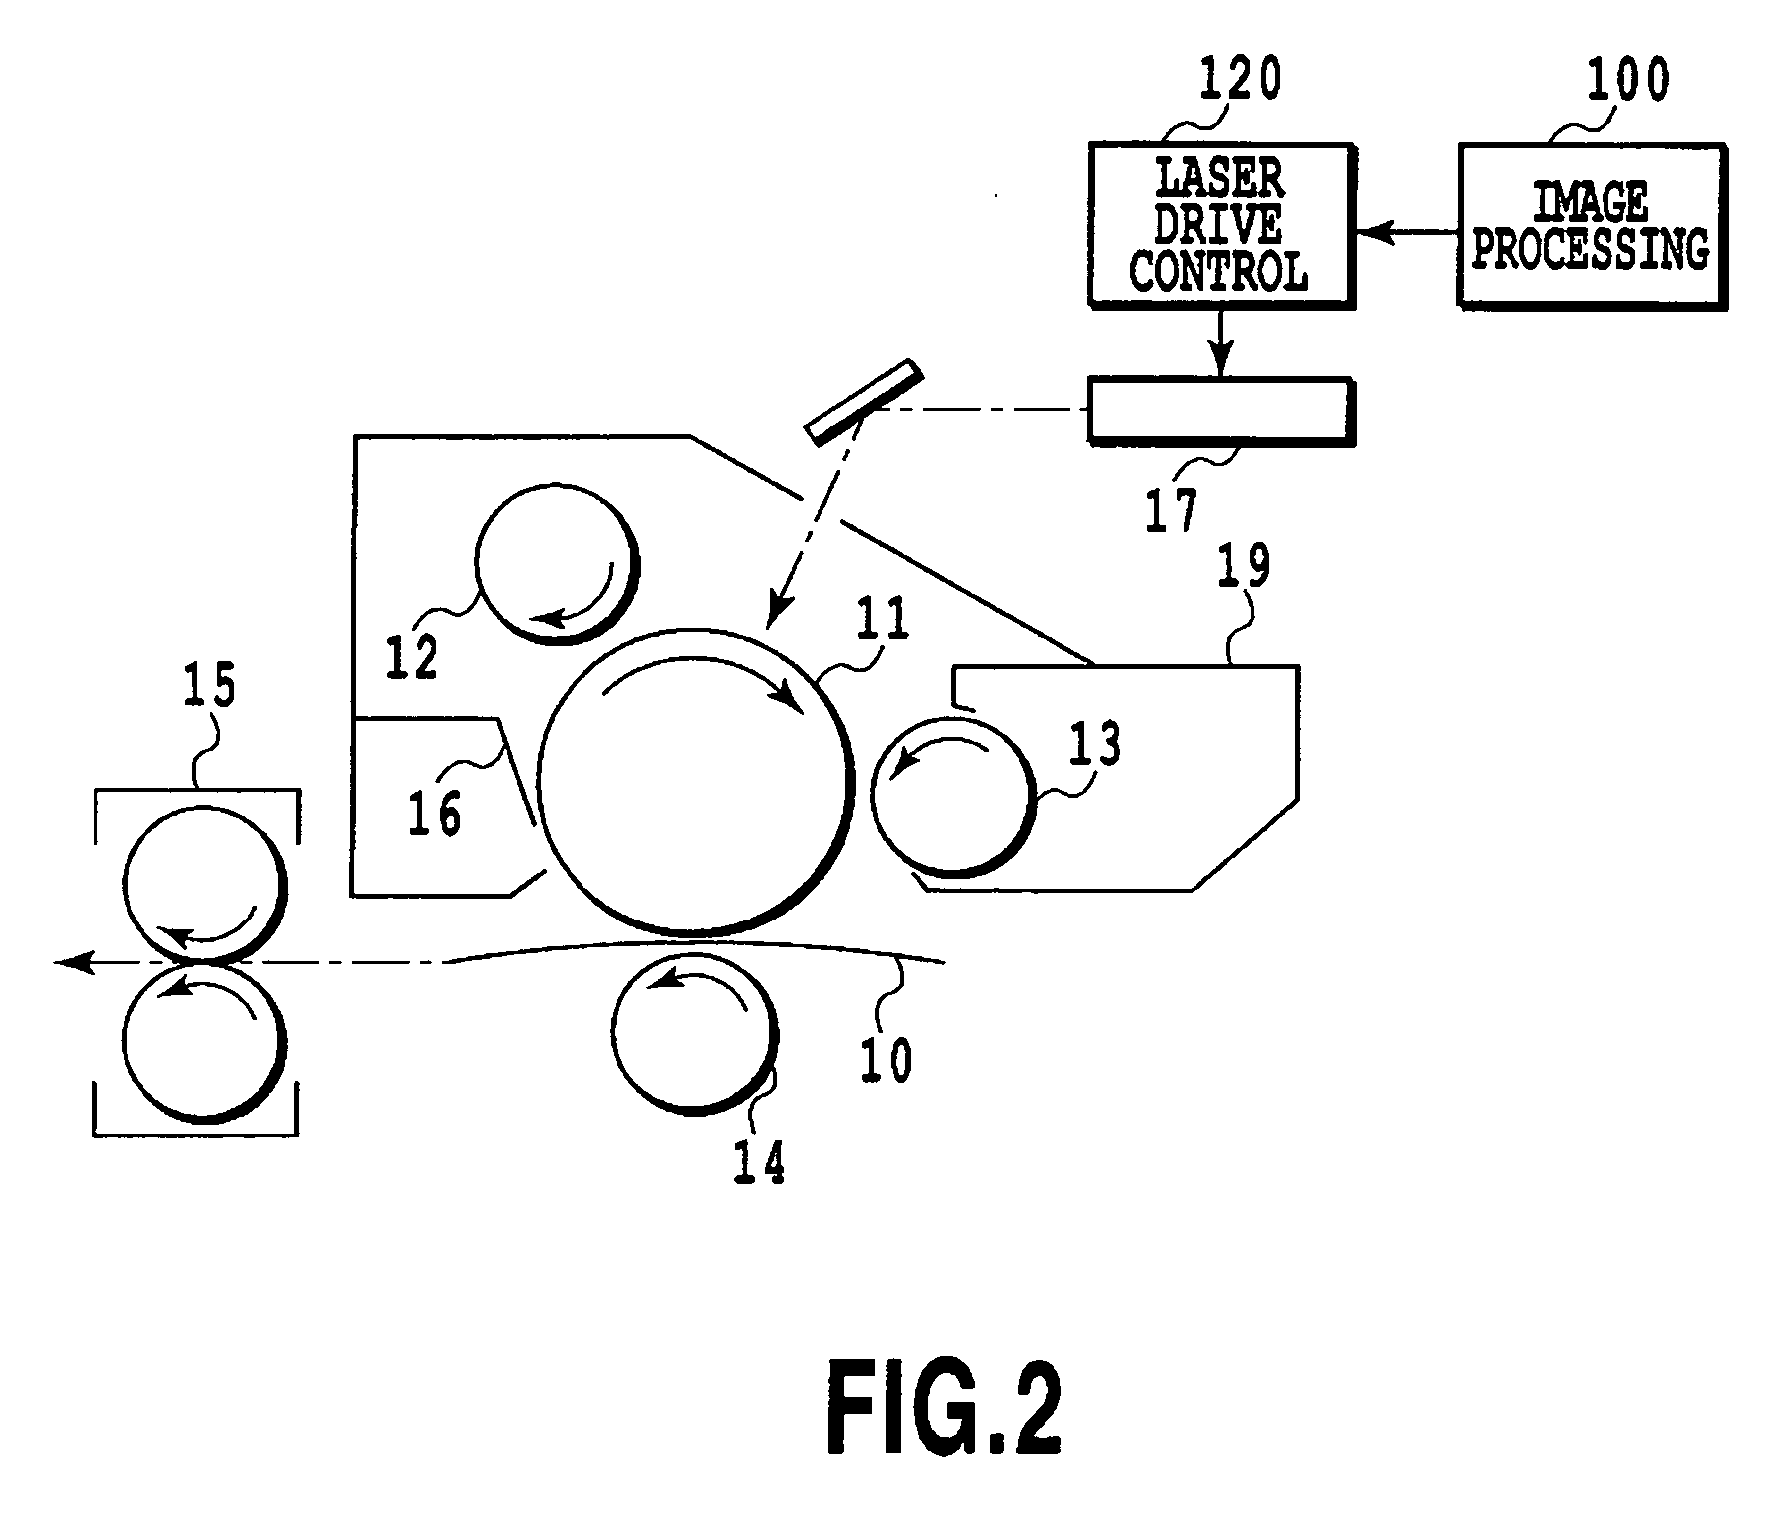 Semiconductor laser drive control device